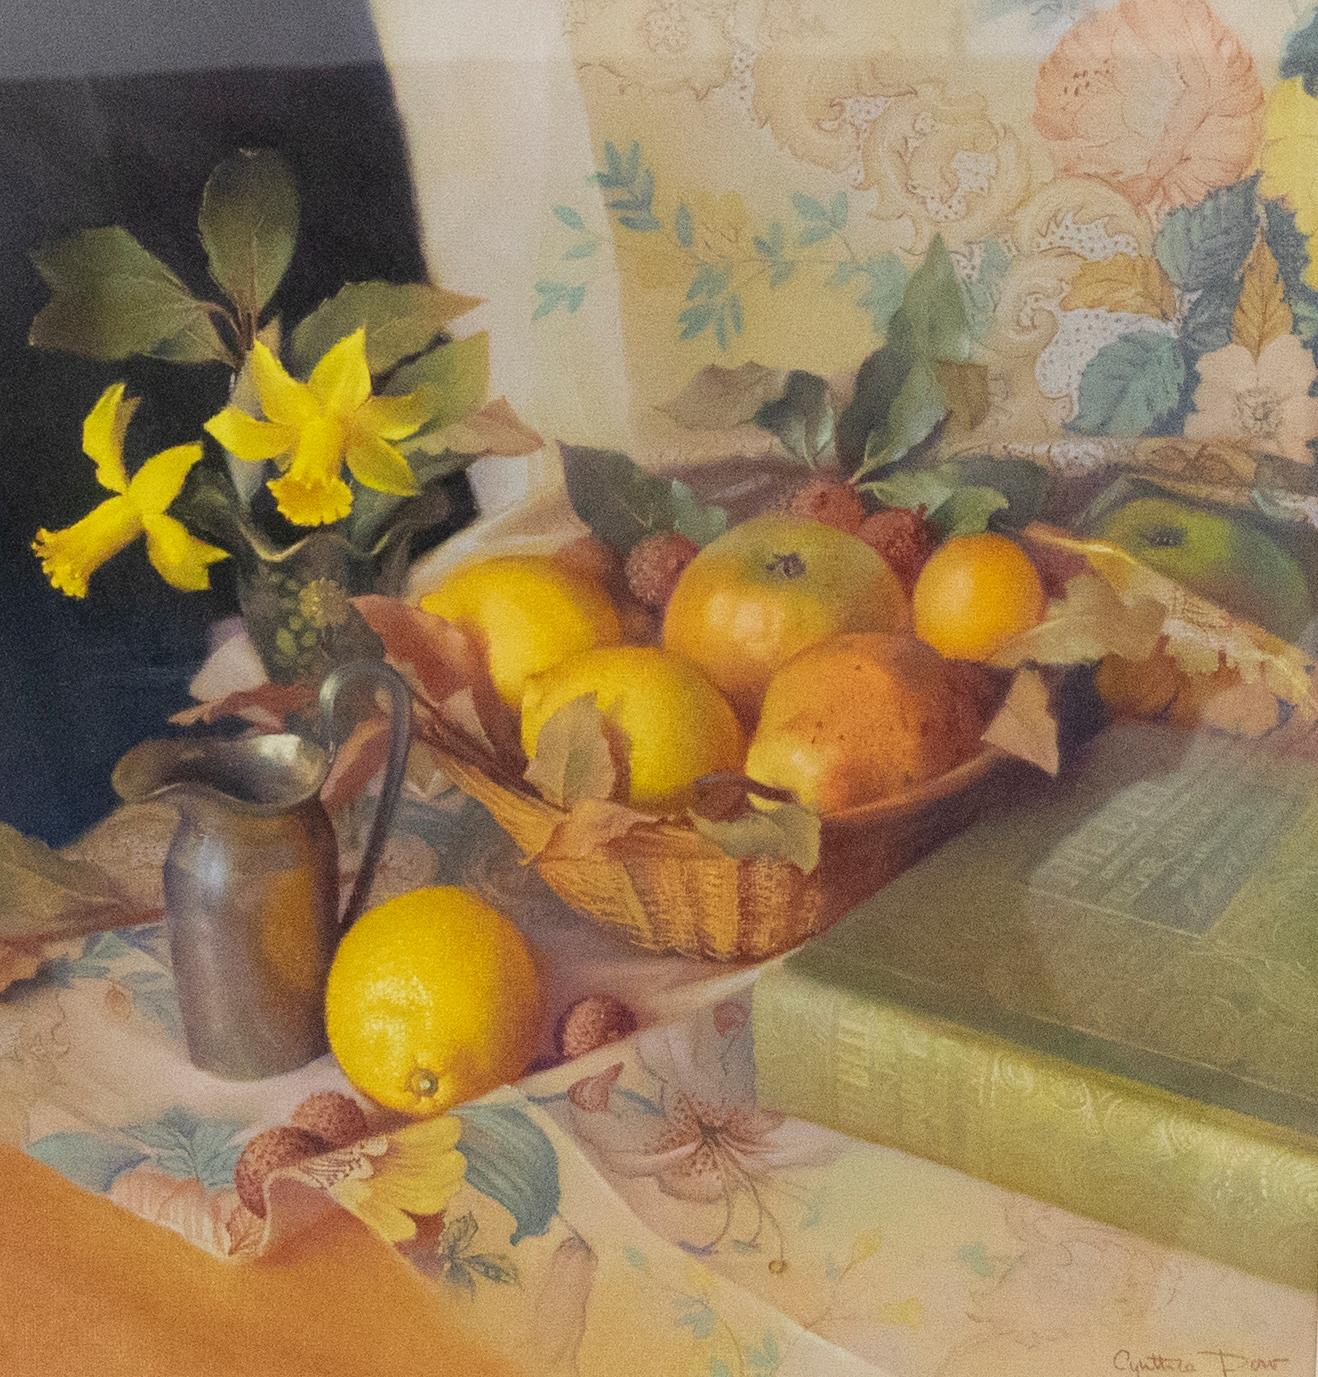 Cynthia Par  - Contemporary Pastel, Spring Still Life - Art by Unknown